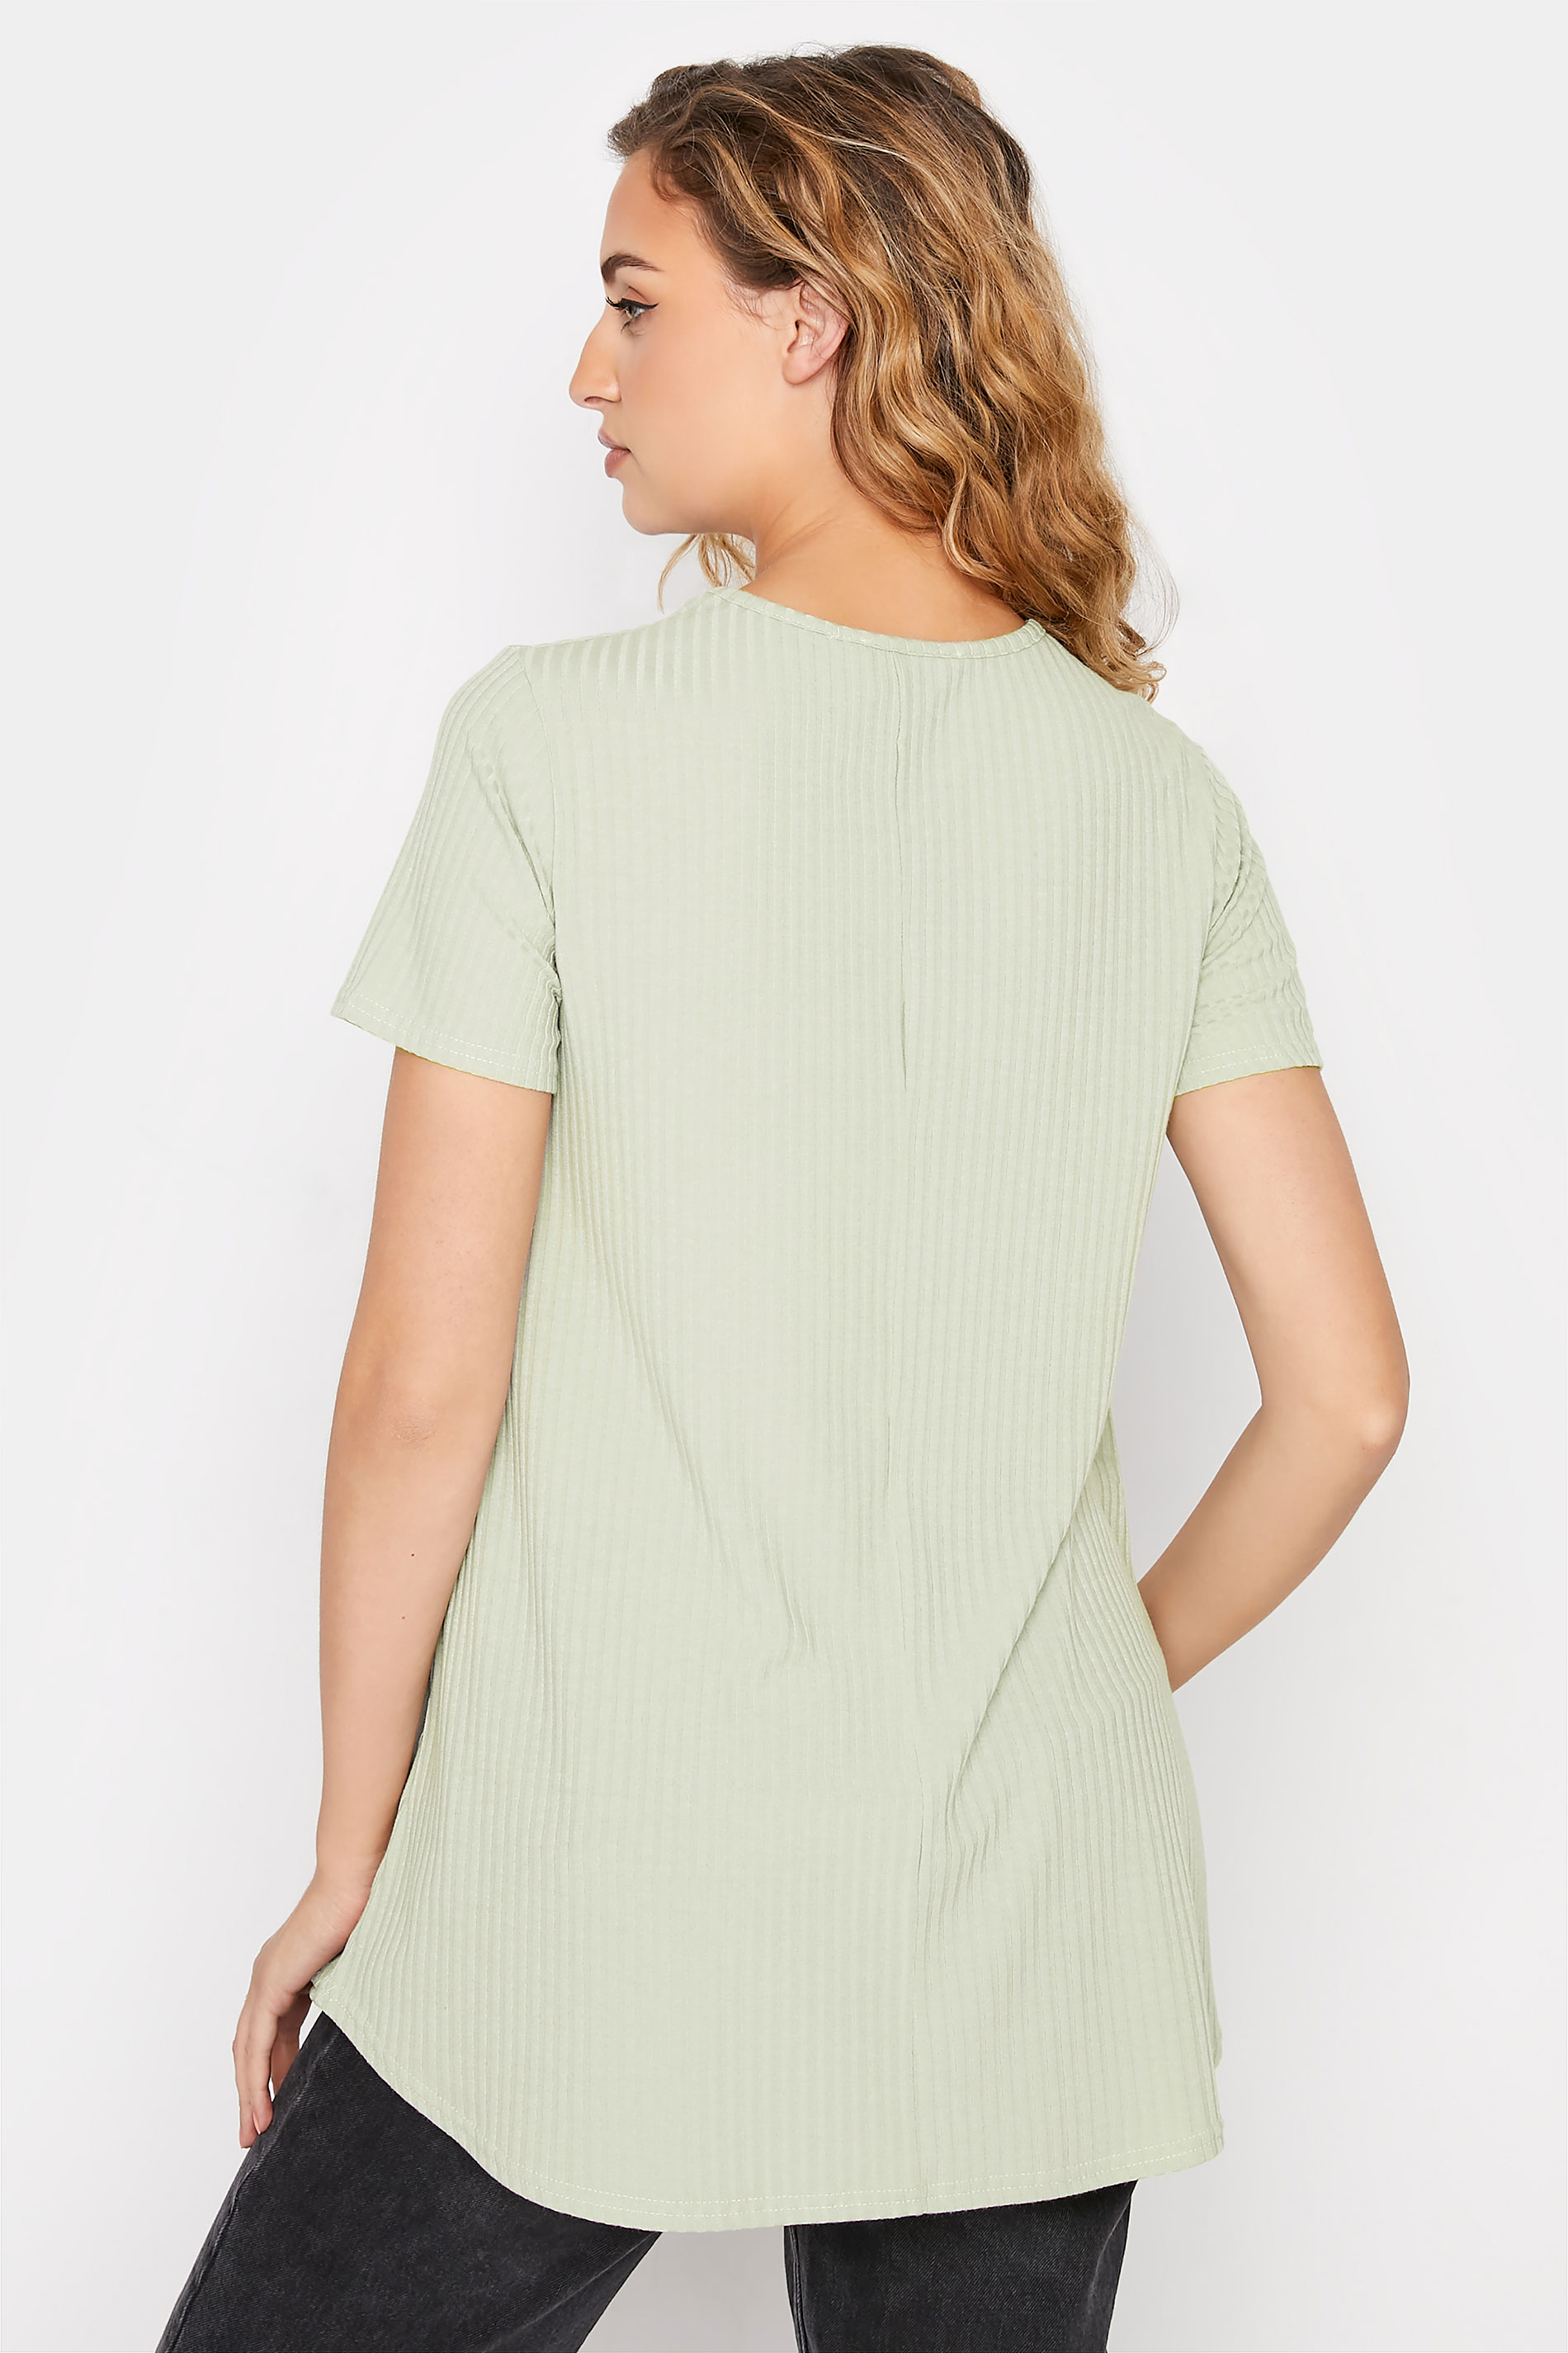 Tall Women's LTS Sage Green Ribbed Swing Top | Long Tall Sally 3